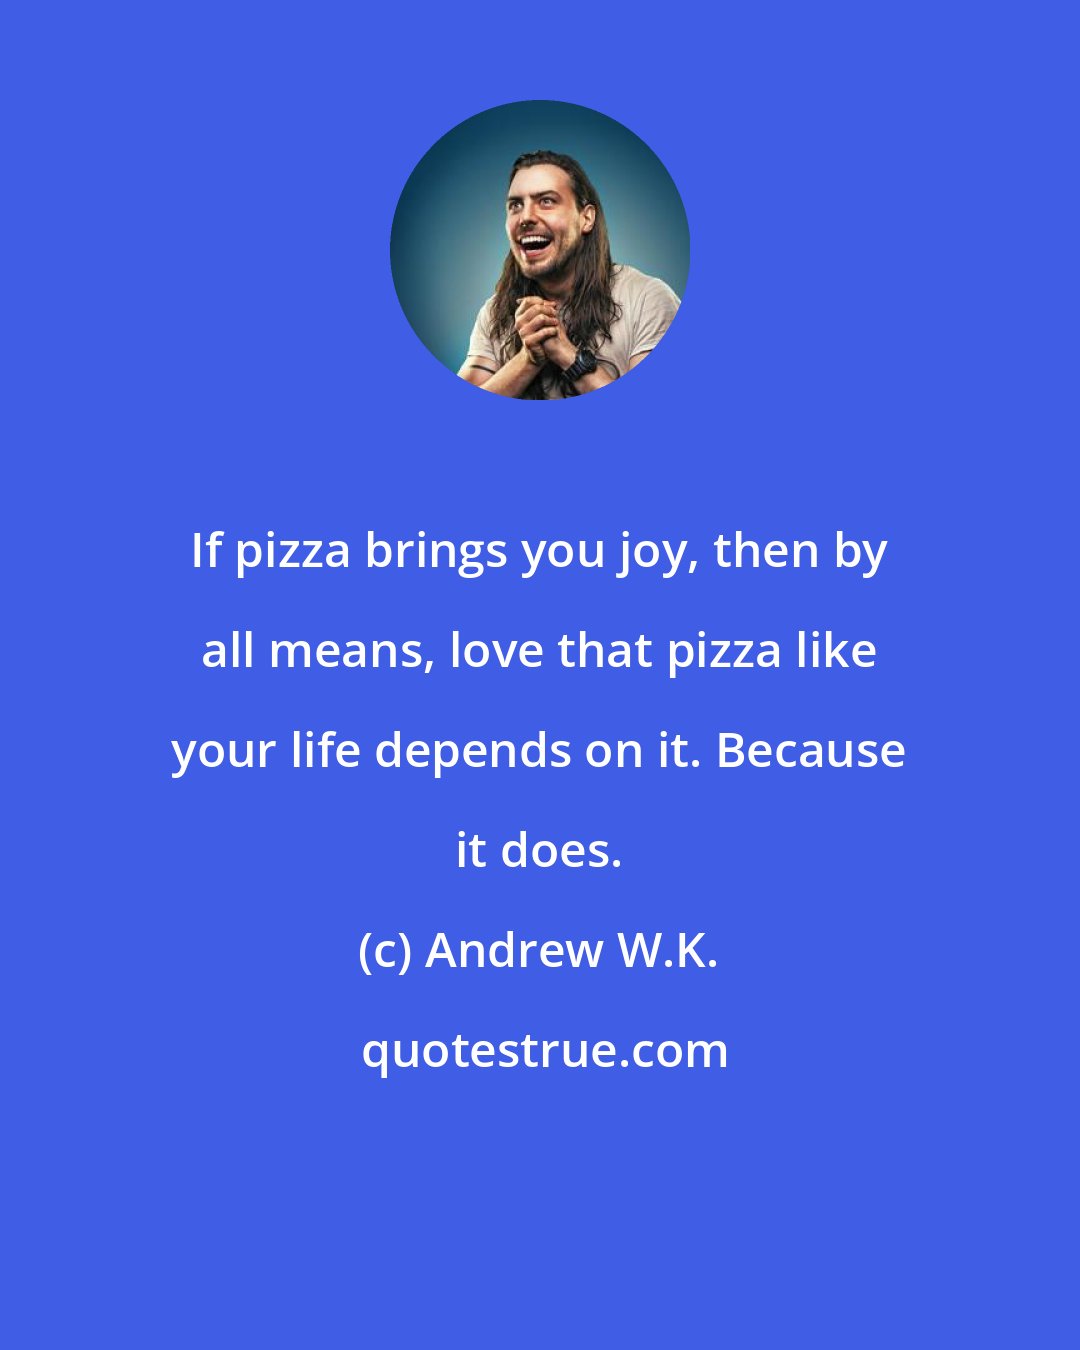 Andrew W.K.: If pizza brings you joy, then by all means, love that pizza like your life depends on it. Because it does.